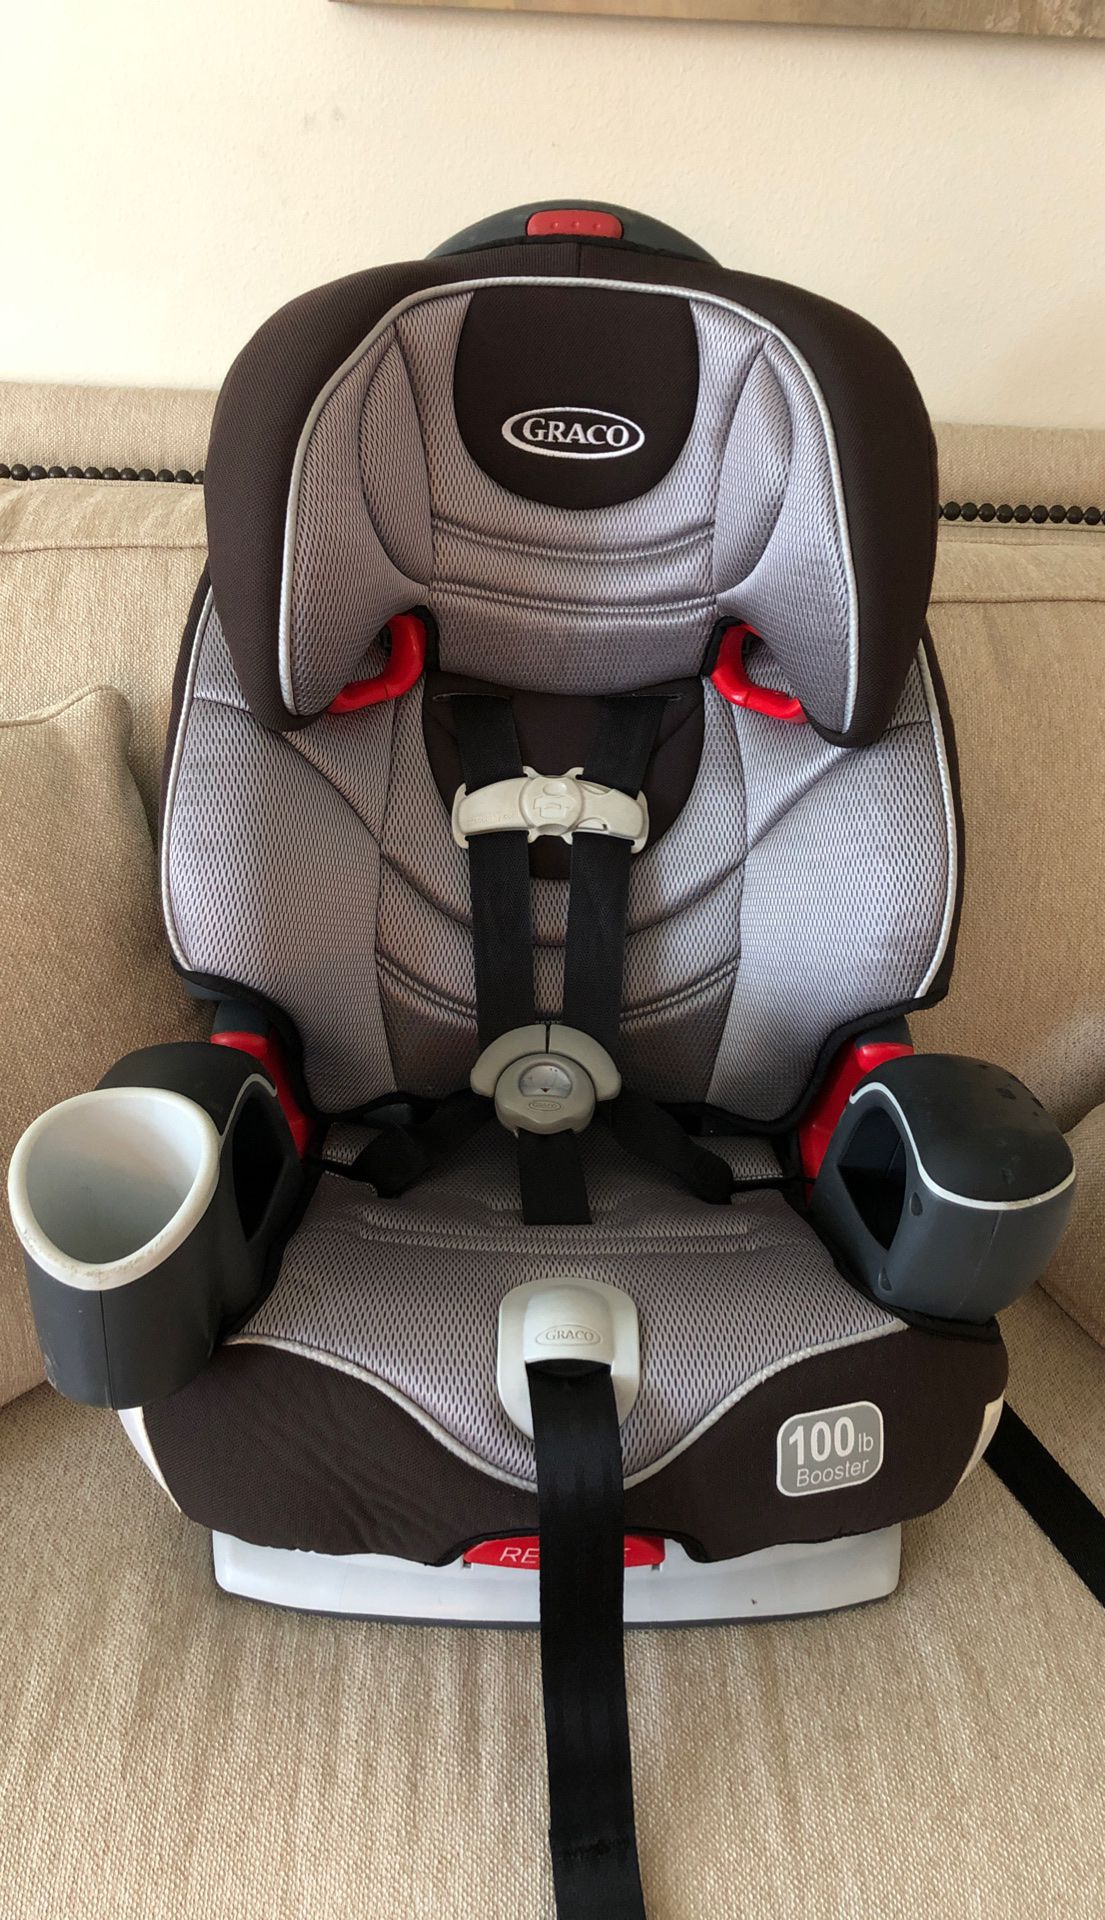 Excellent car seat/ booster chair